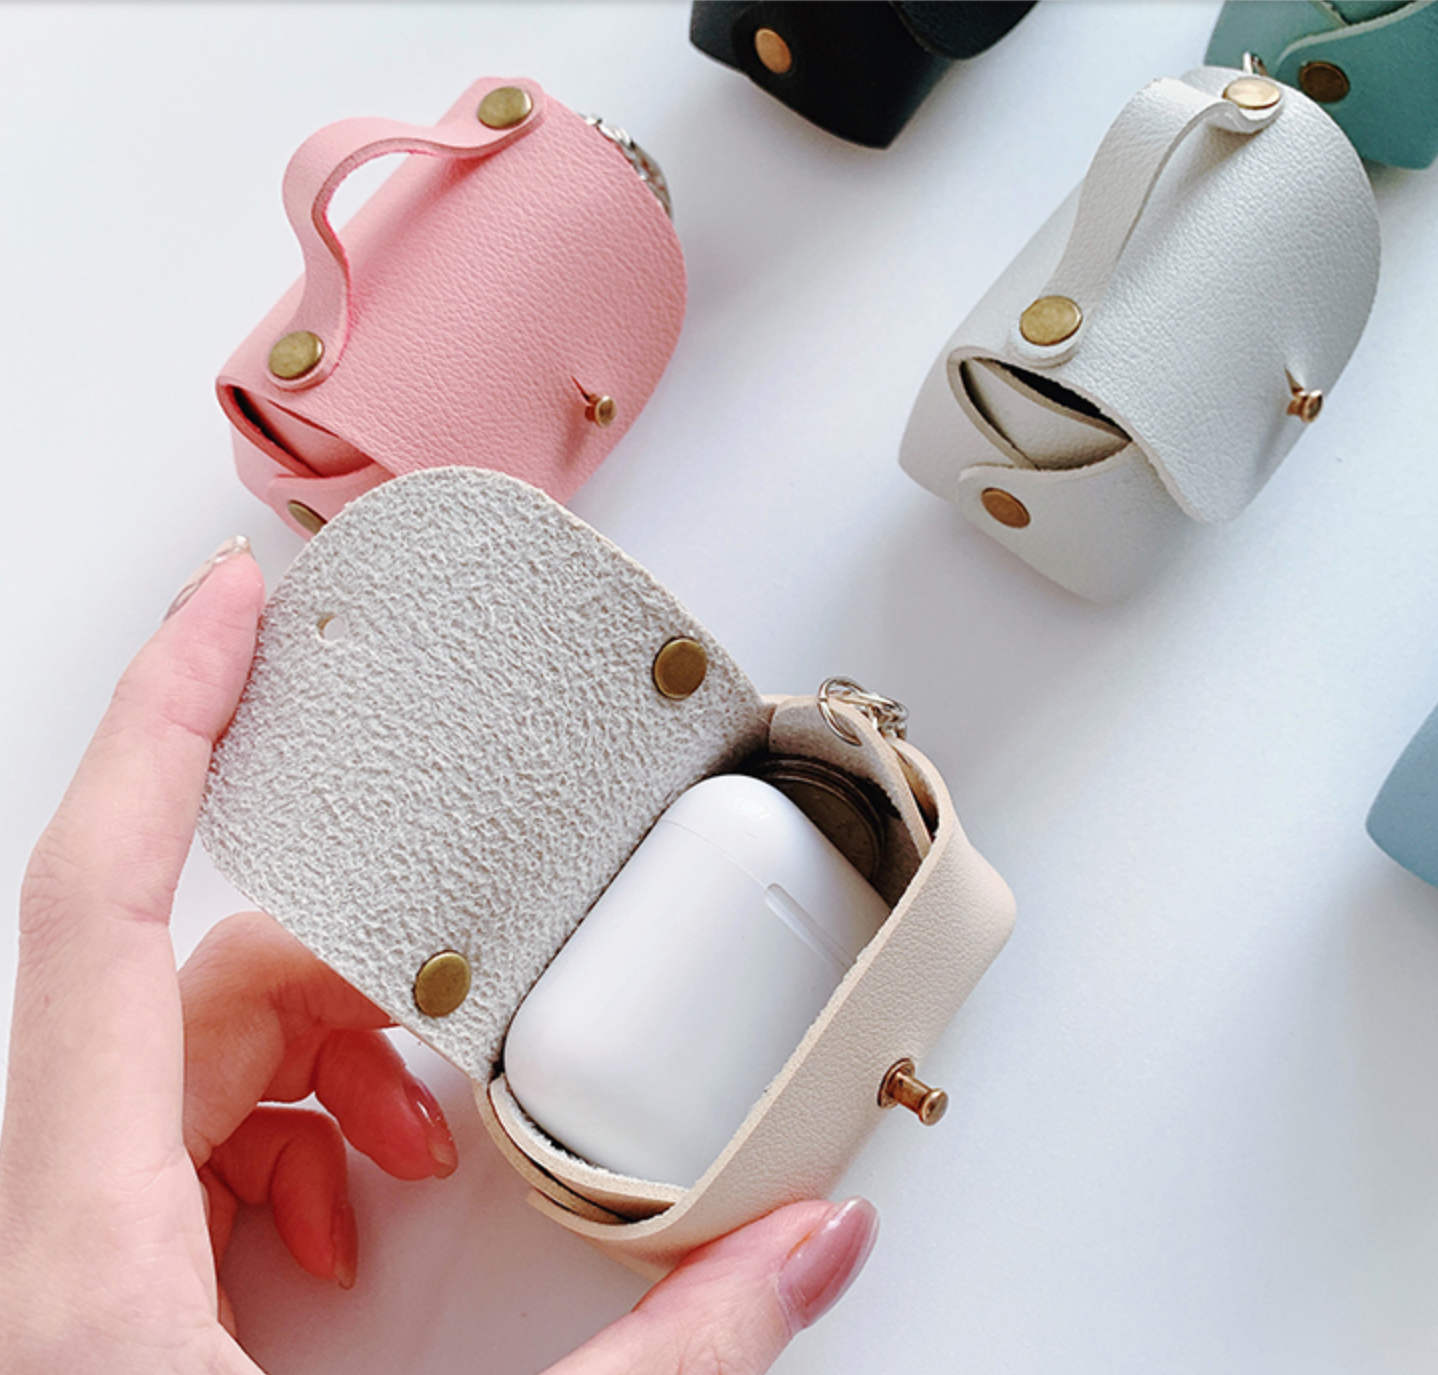 Mini bag case |ミニバッグAirPodsケース – Side Up